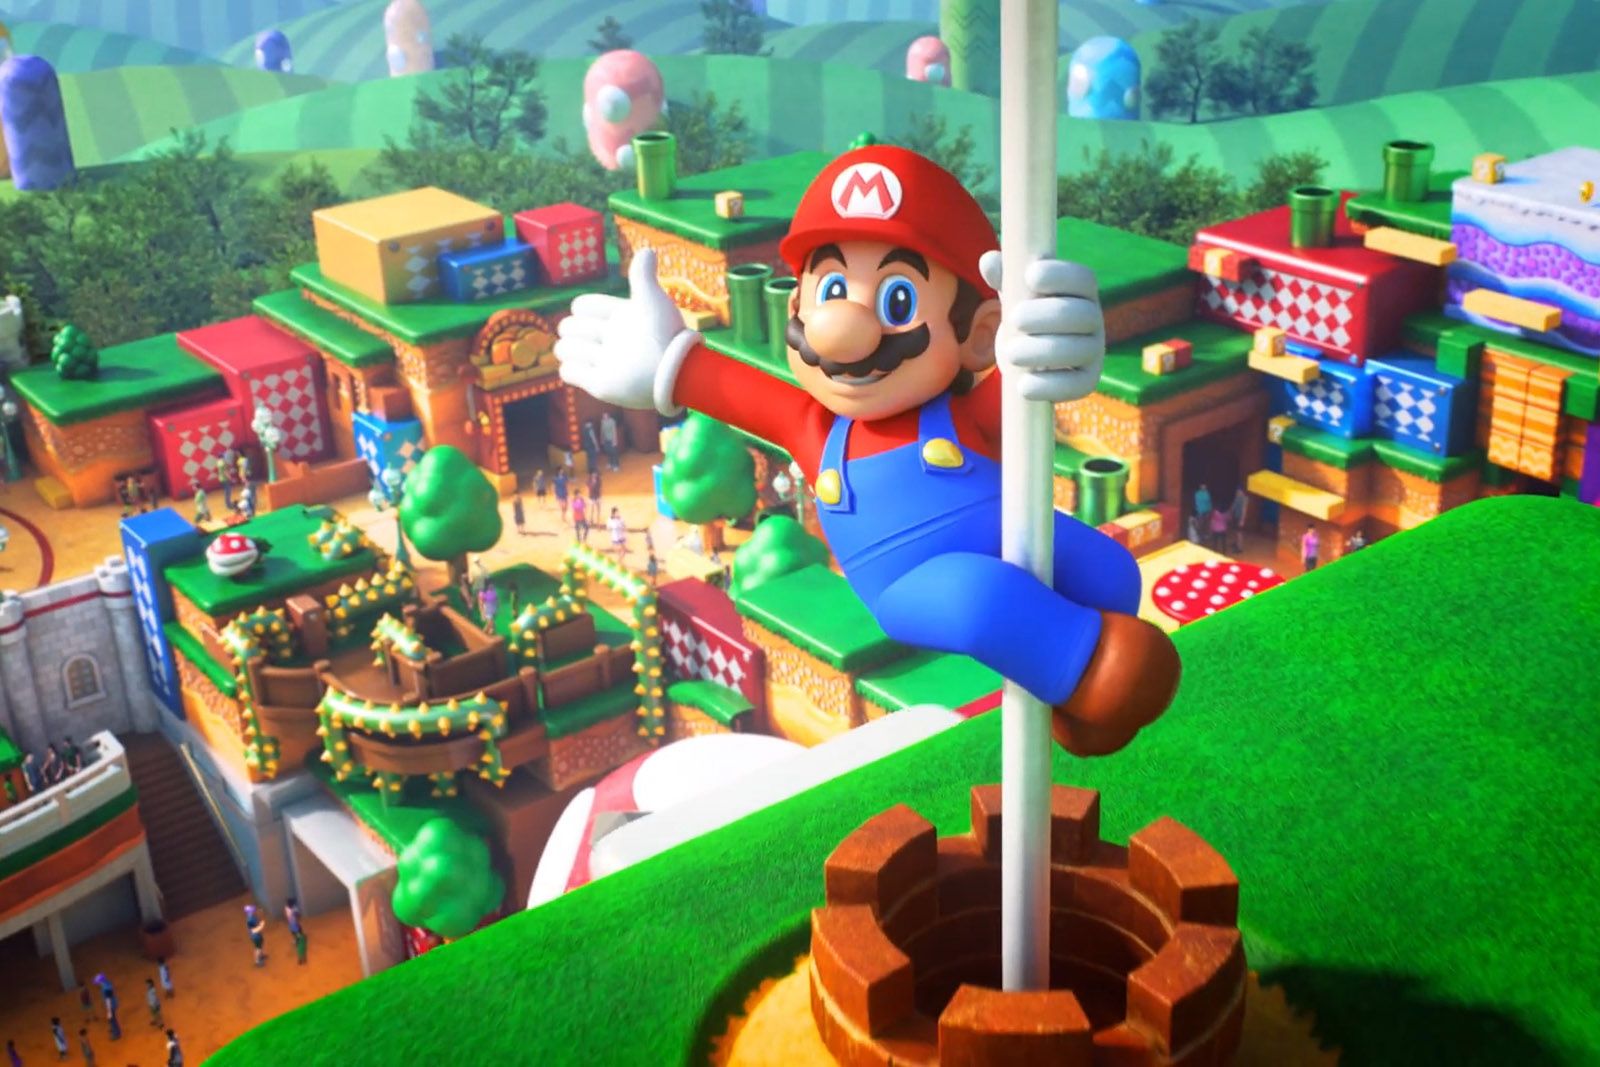 Nintendo theme park officially opens in spring 2020 image 1